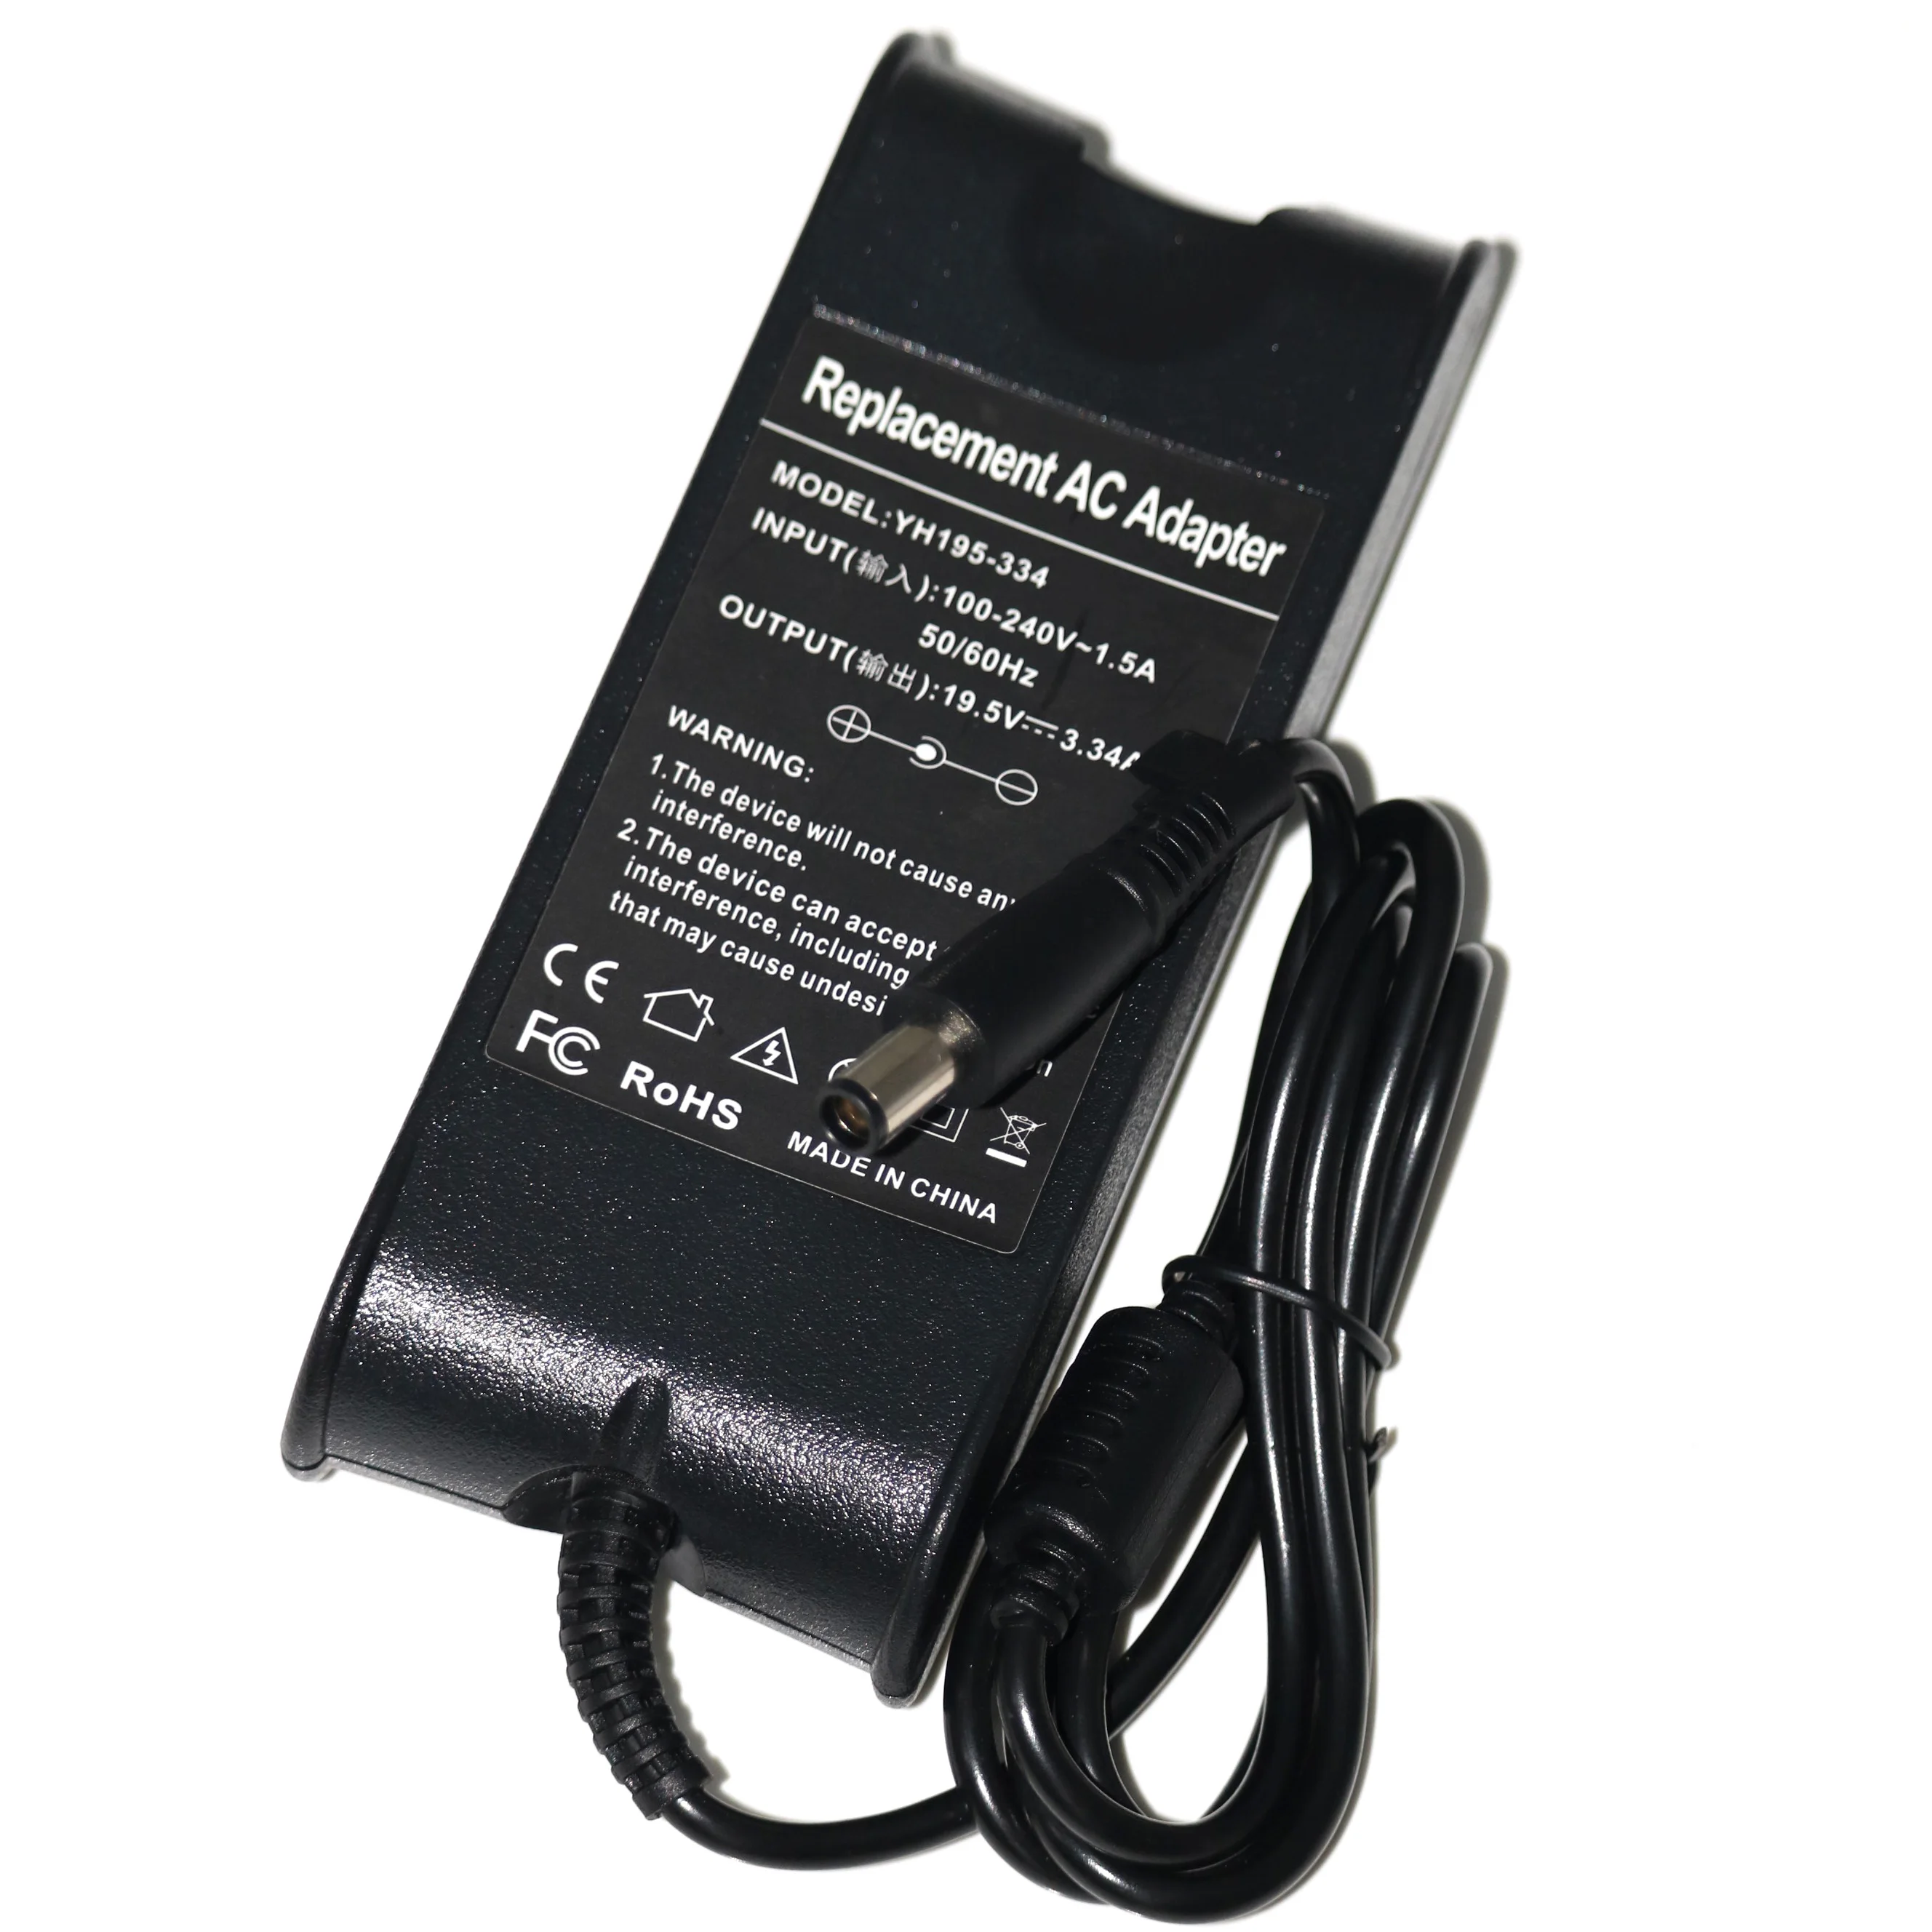 

65W 19.5V 3.34A For Dell Inspiron 15 1750 1545 1525 6000 8600 PA12 XPS M1330 PA-12 AC Laptop Adapter Charger Power Supply